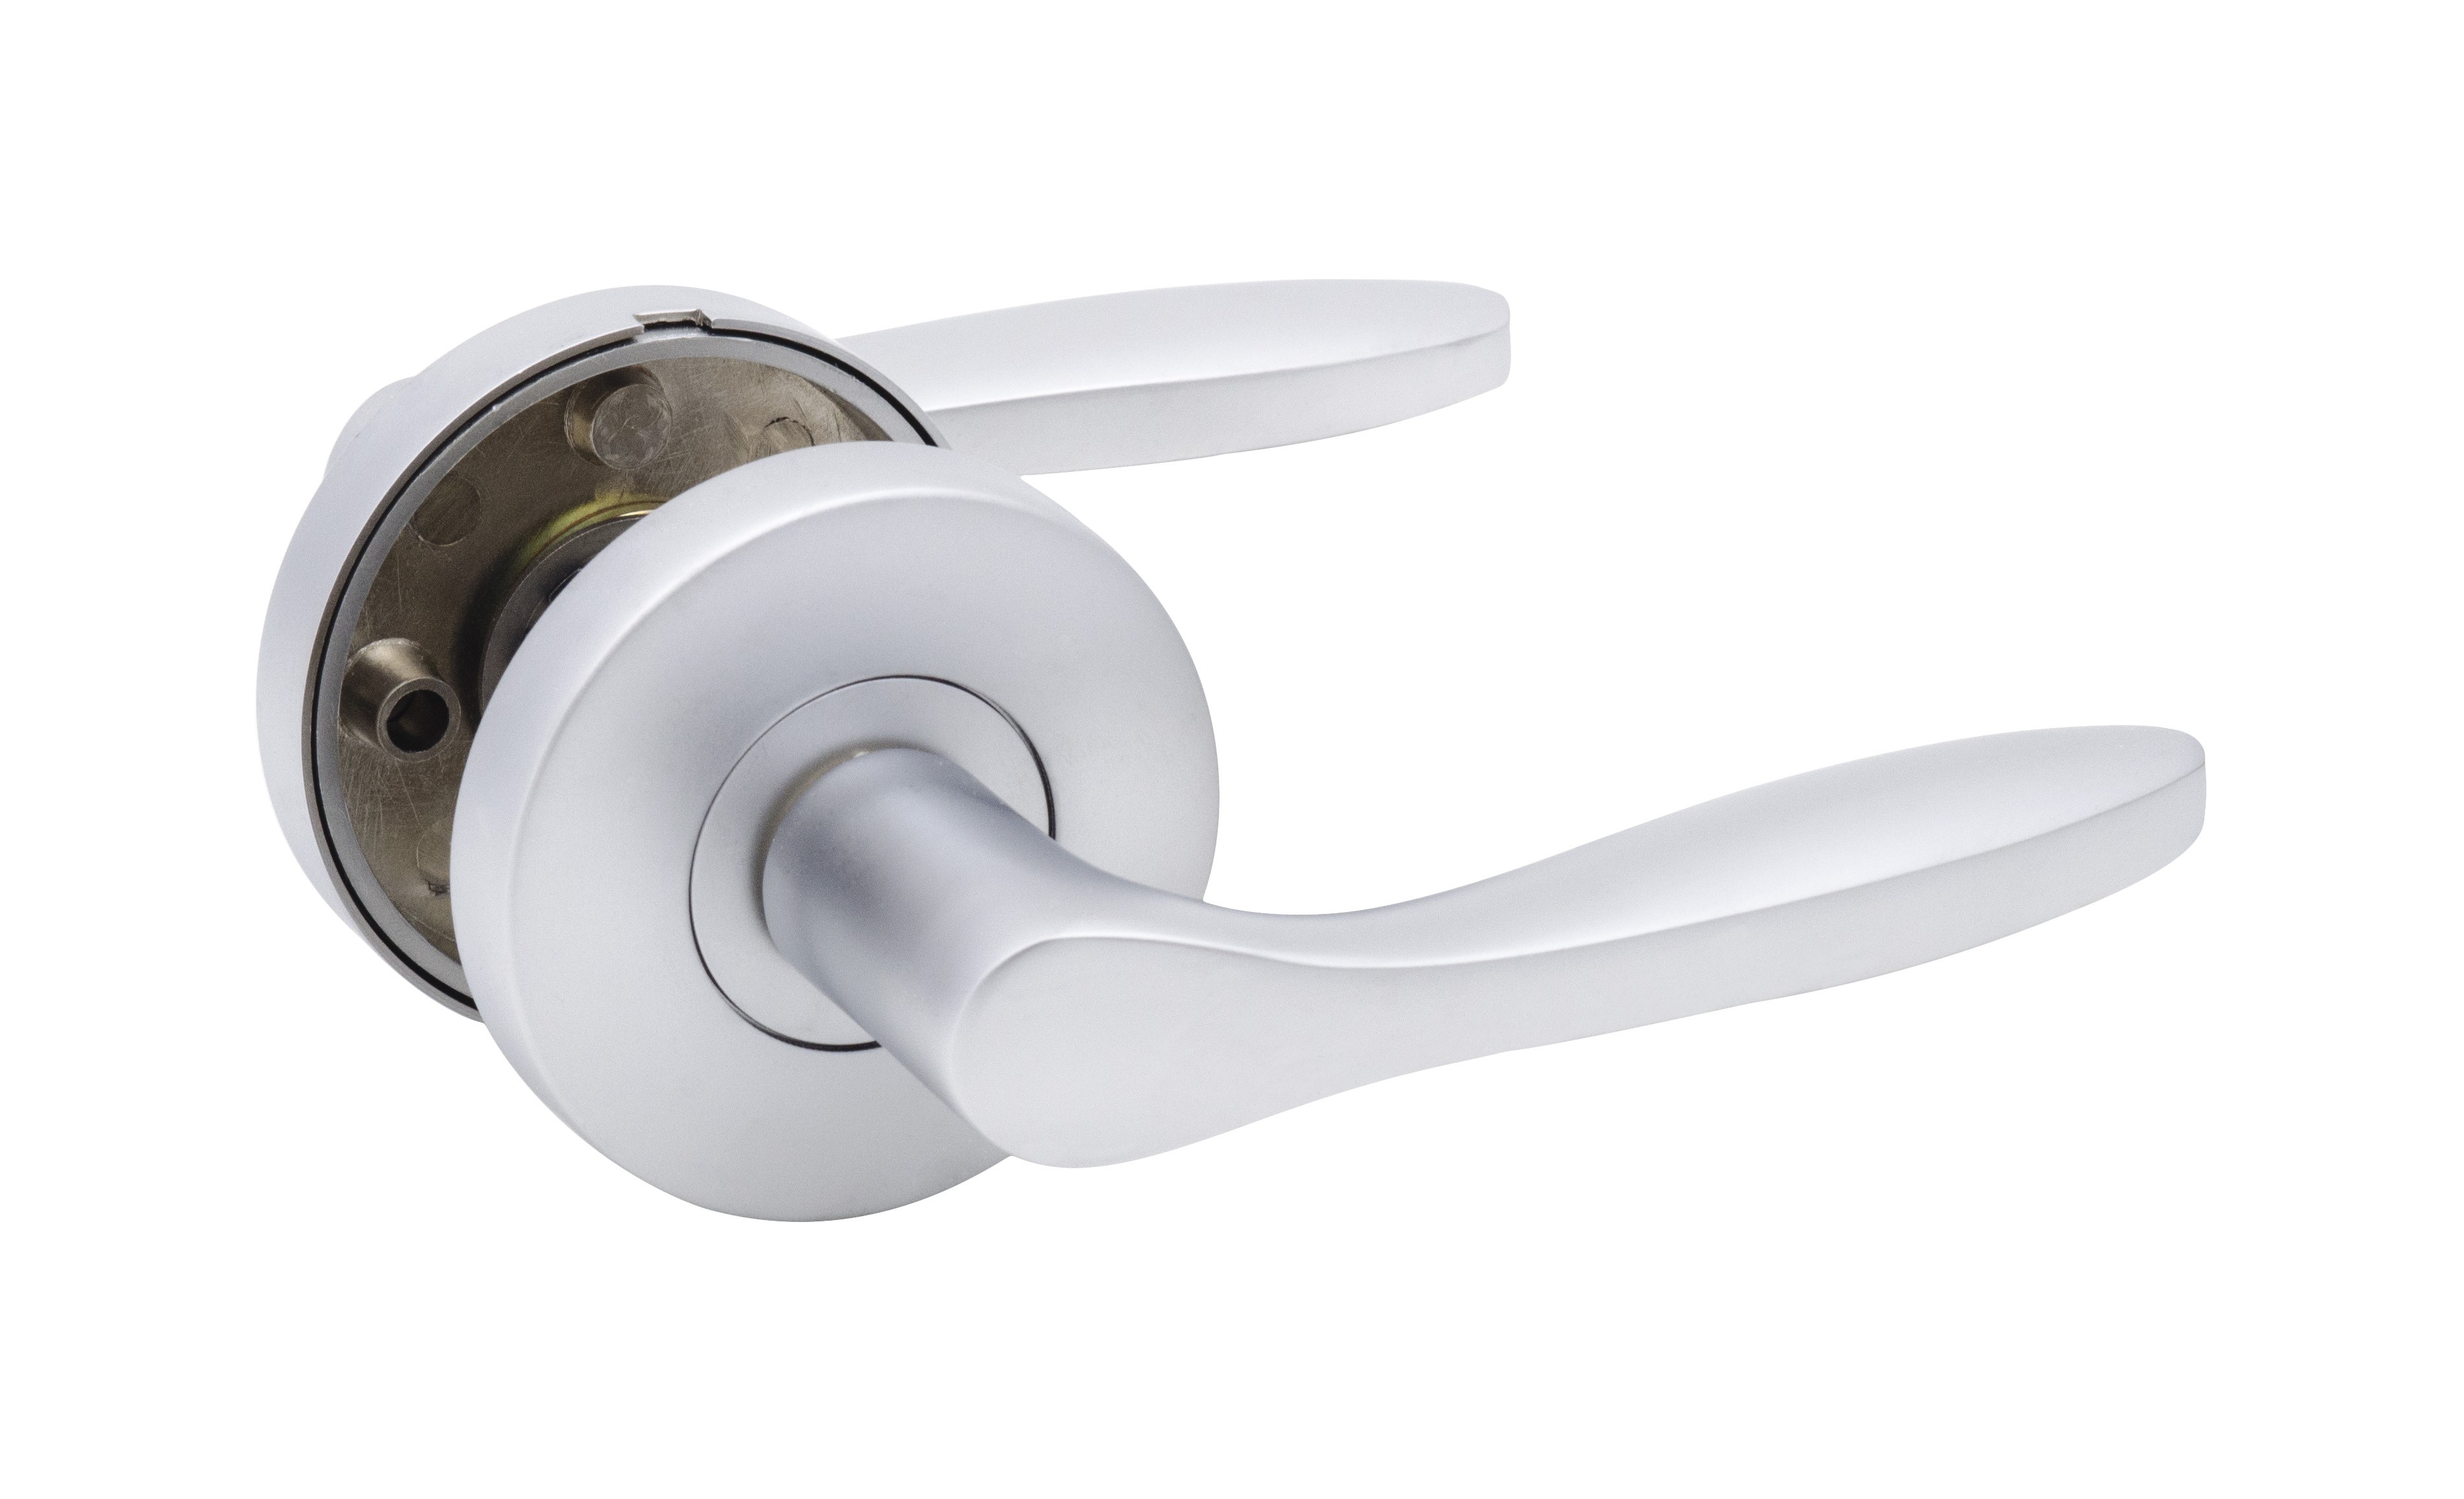 ORION lever privacy set handle